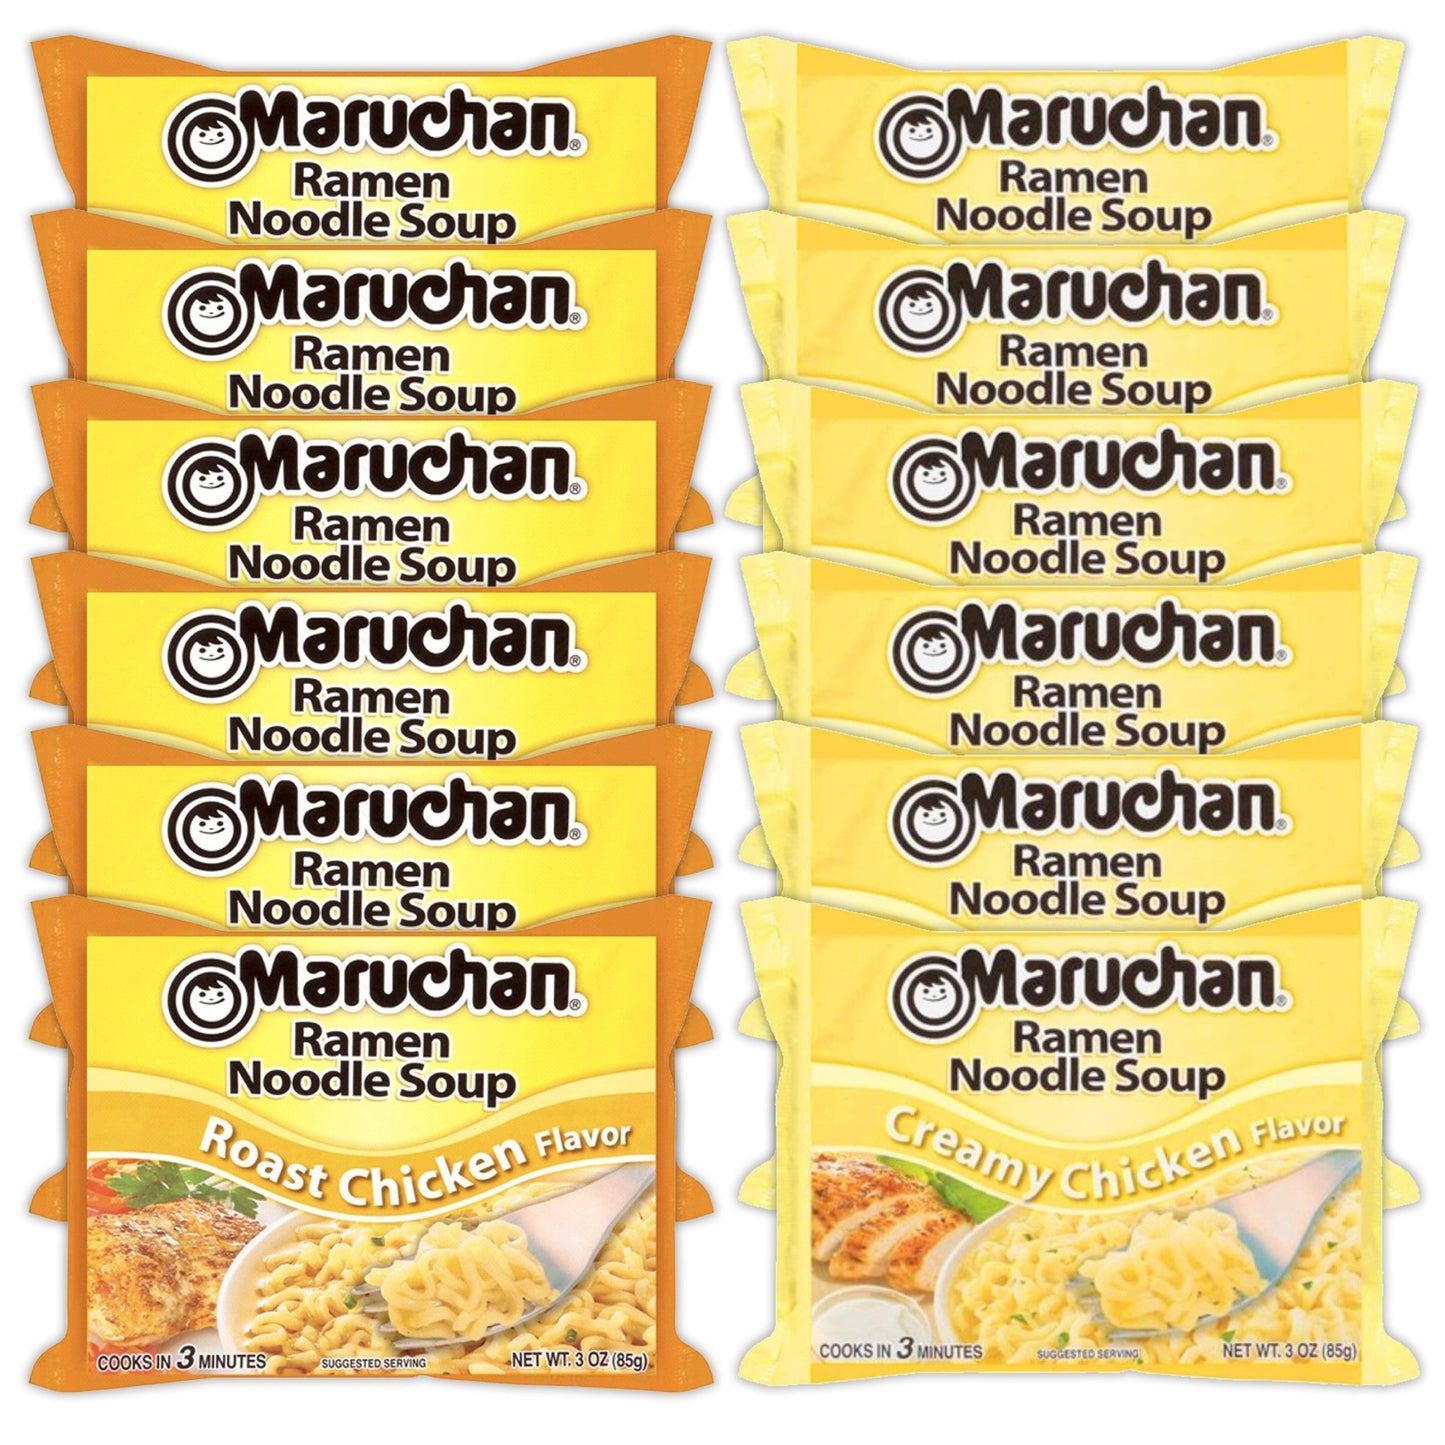 Maruchan Ramen Instant Noodle Soup Variety, 2 Flavors - 6 Packs Roast Chicken & 6 Packs Creamy Chicken , 3 Ounce Single Servings Lunch / Dinner Variety